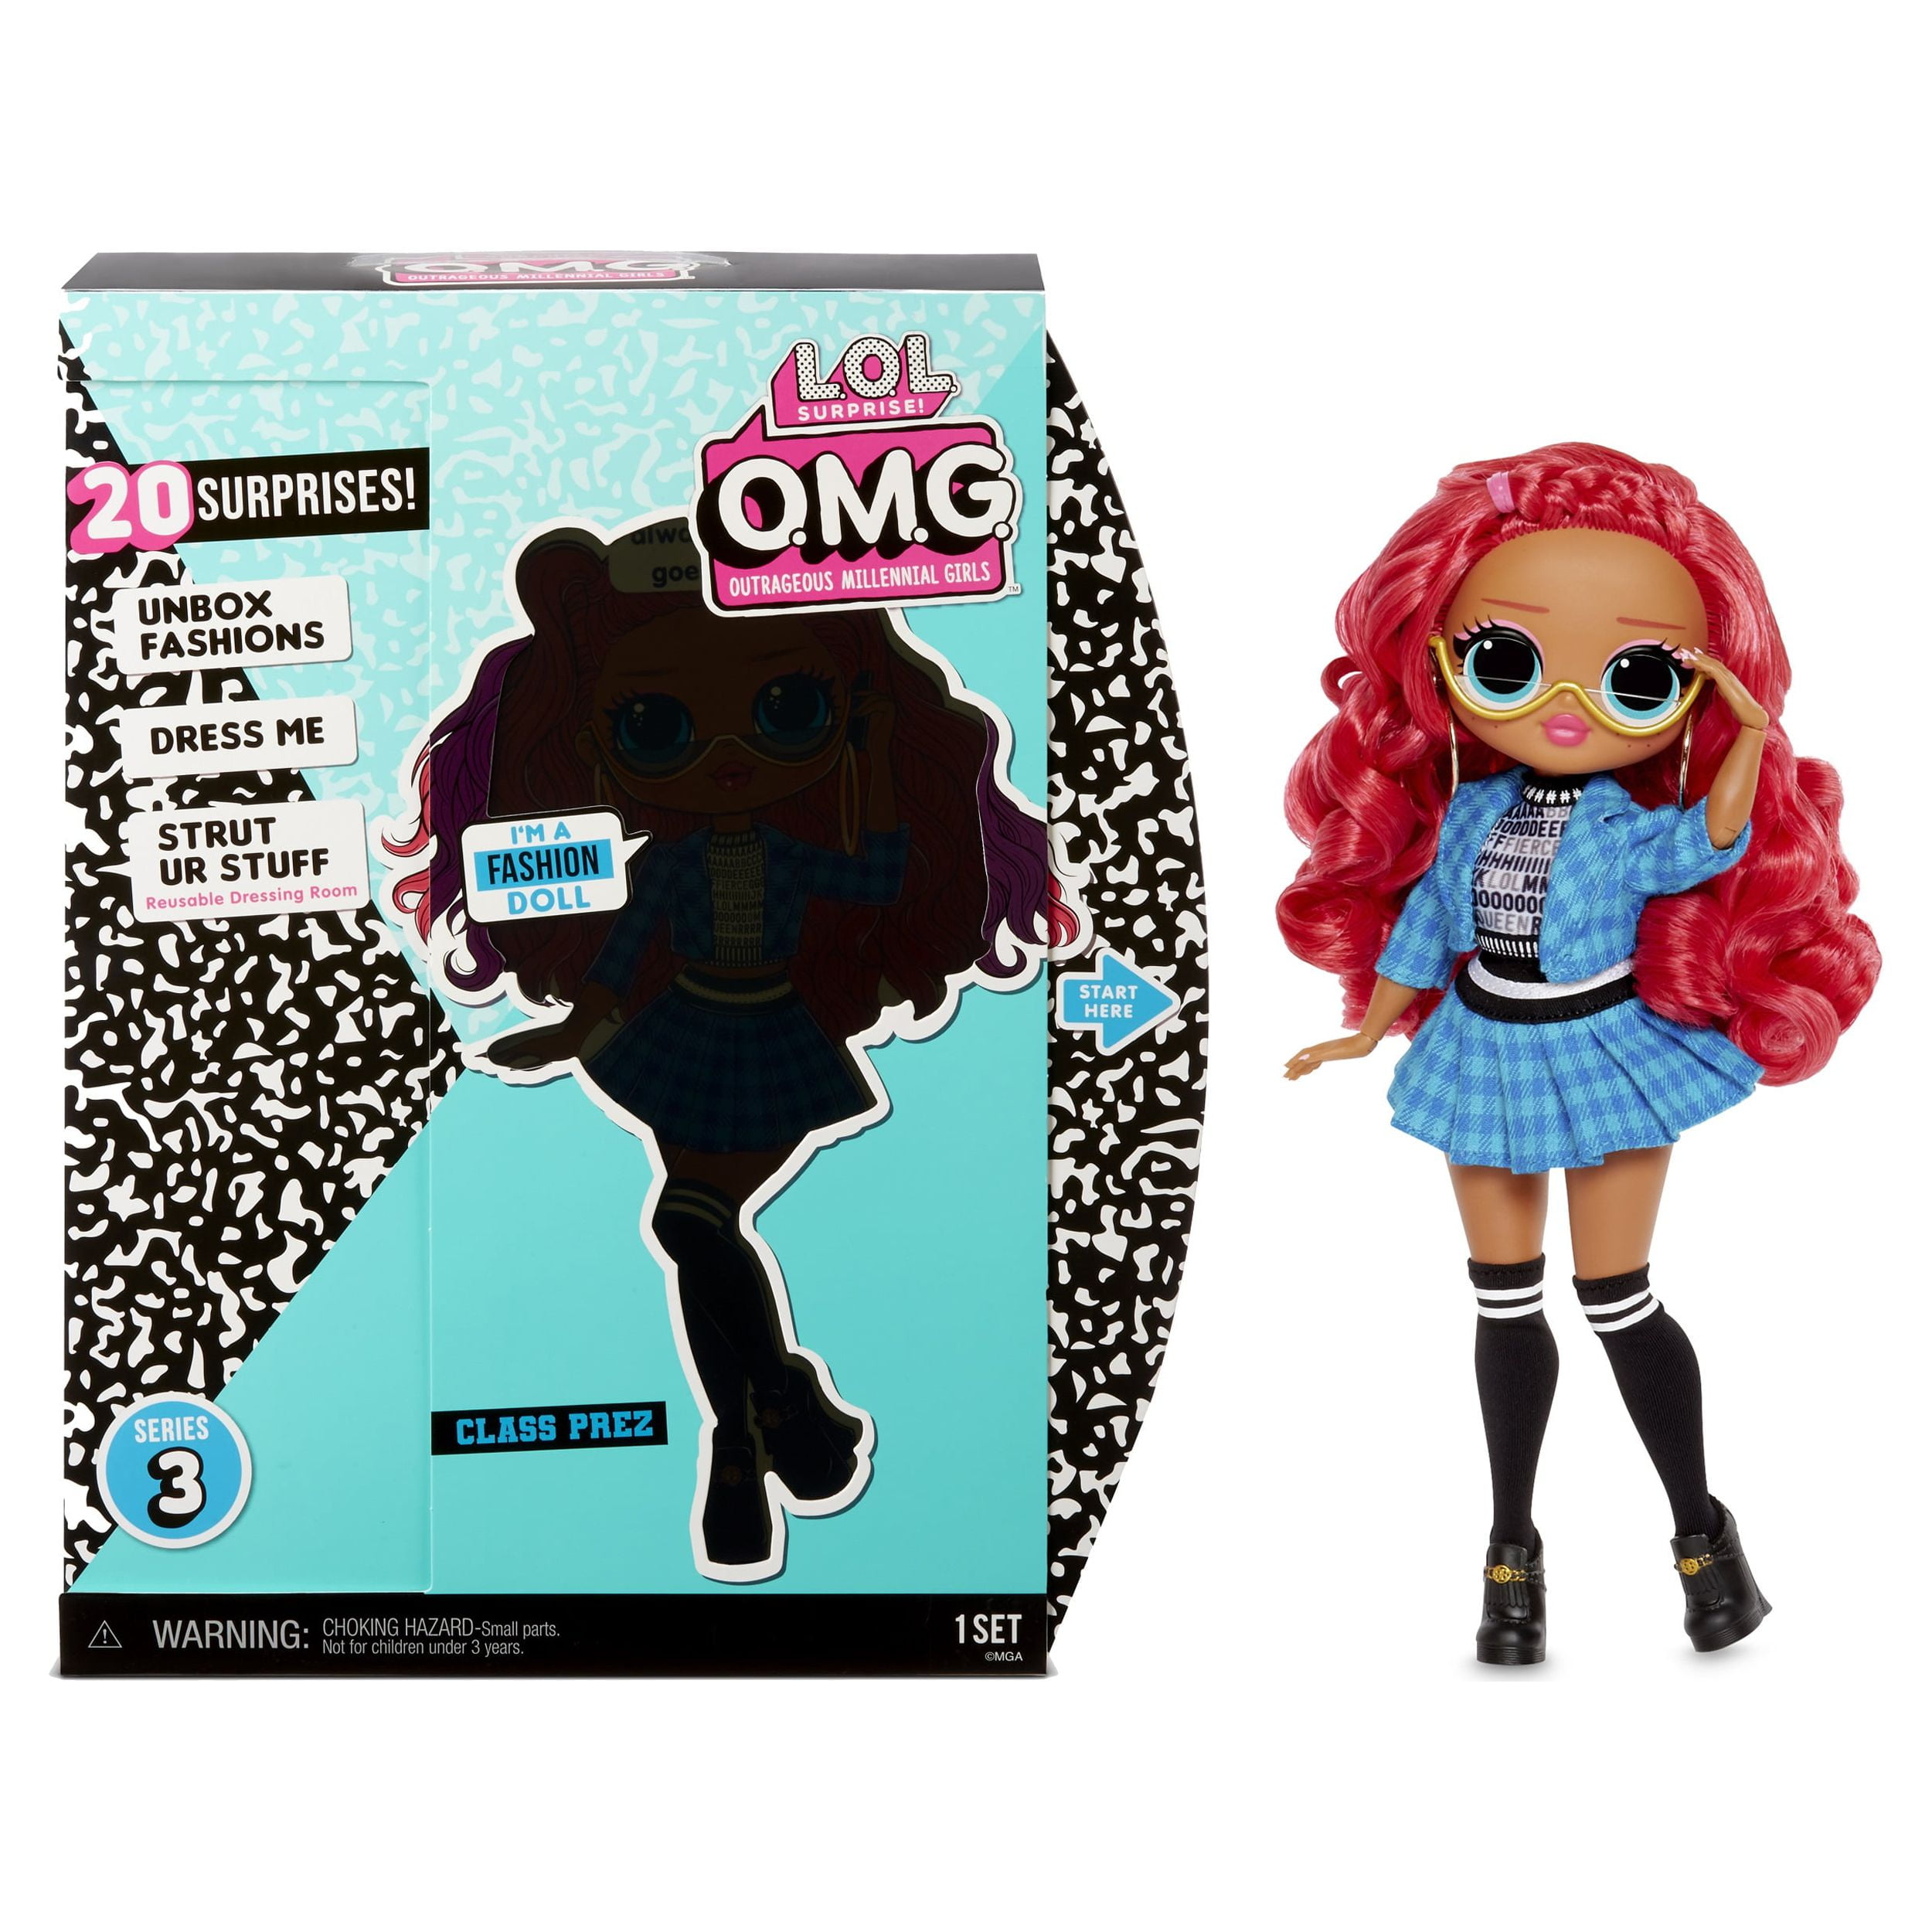 (3 pack) L.O.L. Surprise Fashion Show Dolls in Paper Ball with 8 Surprises,  Accessories, Collectible Doll, Paper Packaging, Fashion Theme, Fashion Toy